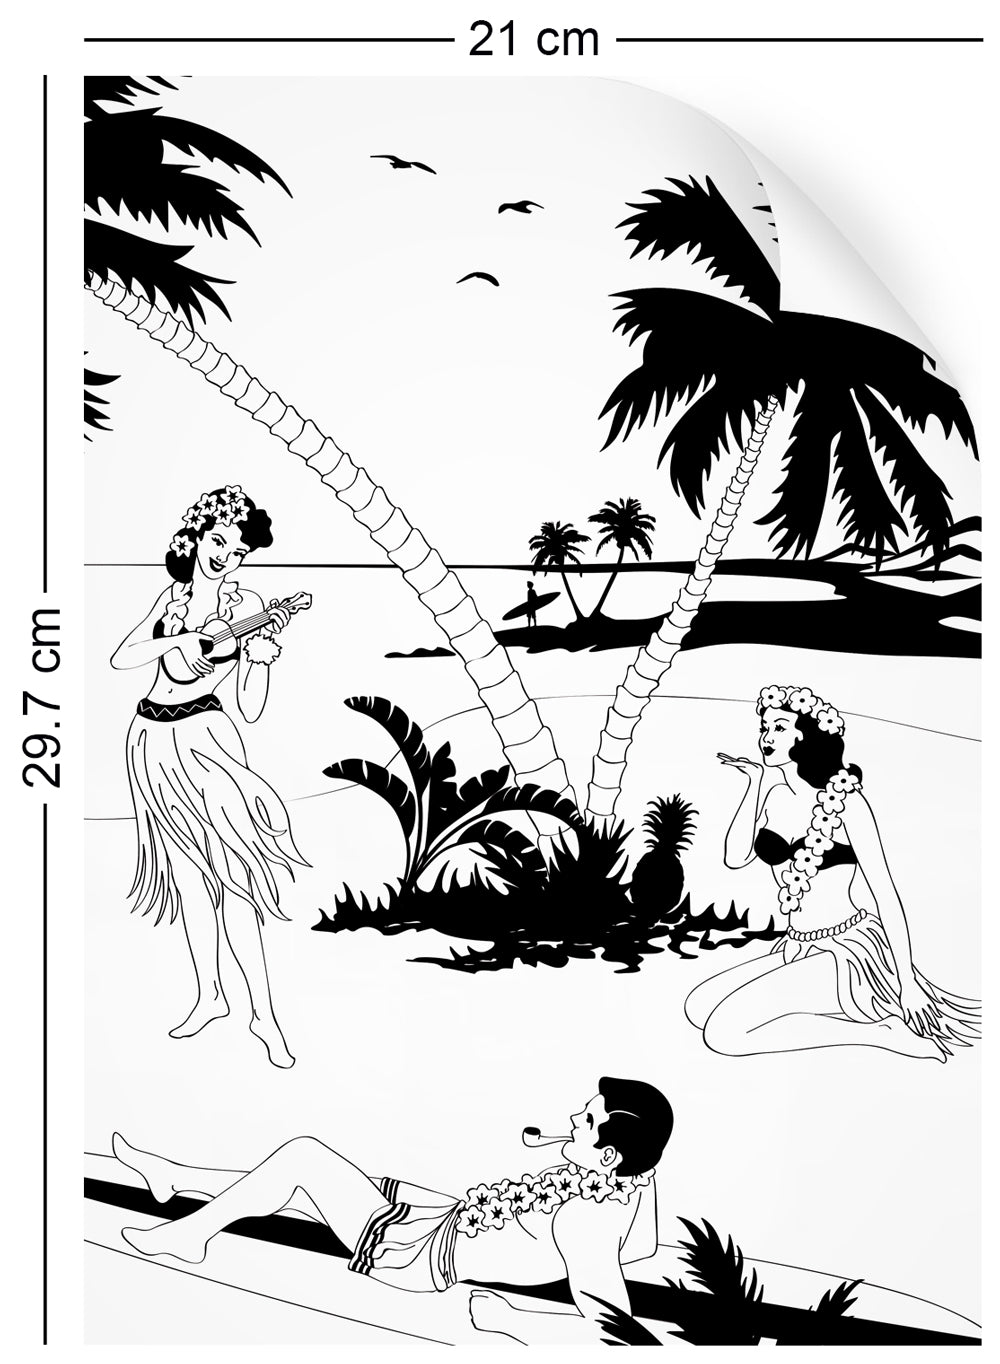 a4 wallpaper sample with Hawaiian surfers and hula girls design in black and white 